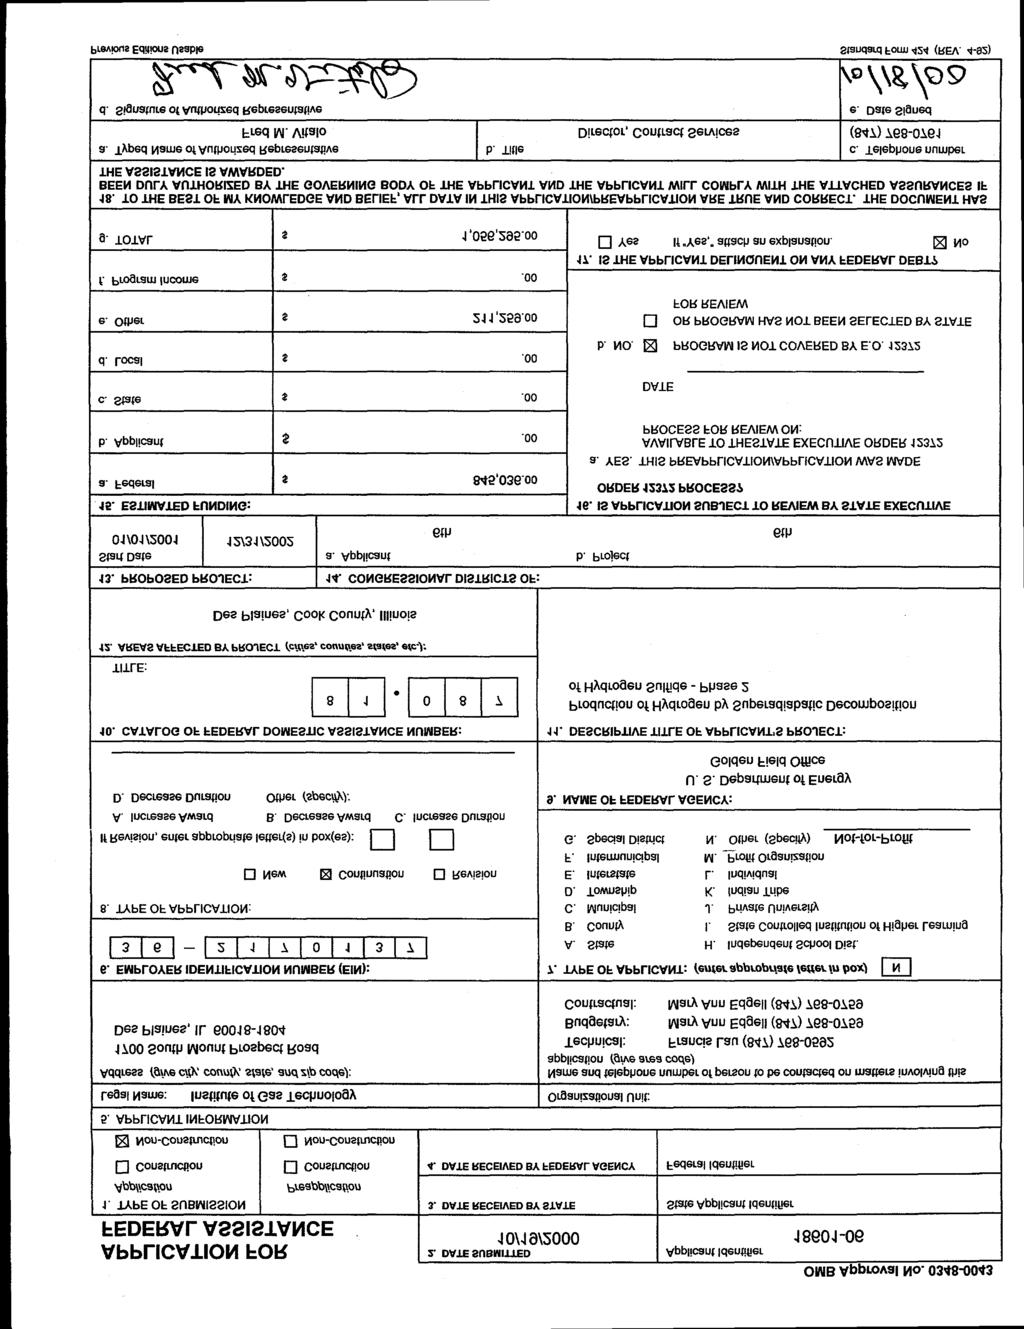 2. DATESUBMITTED APPLICATION FOR Applicant Identifier 10/19/2000 18601-06 FEDERAL ASSISTANCE 1. TYPE OF SUBMISSION 3.